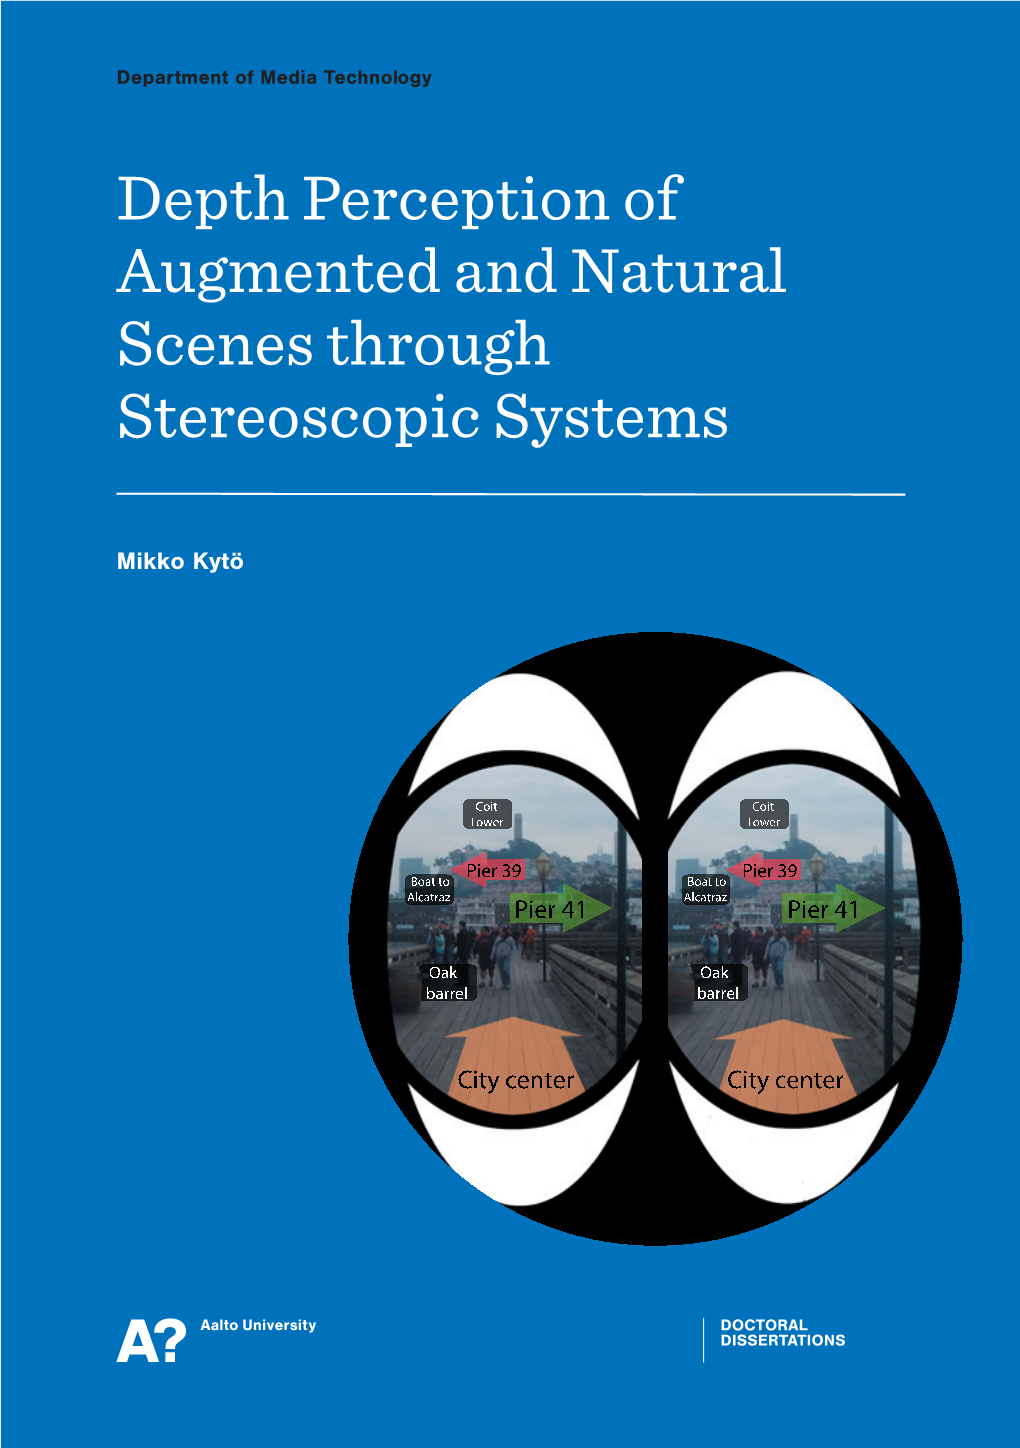 Dept Augm Scen Stere Depthperception of Augmented And